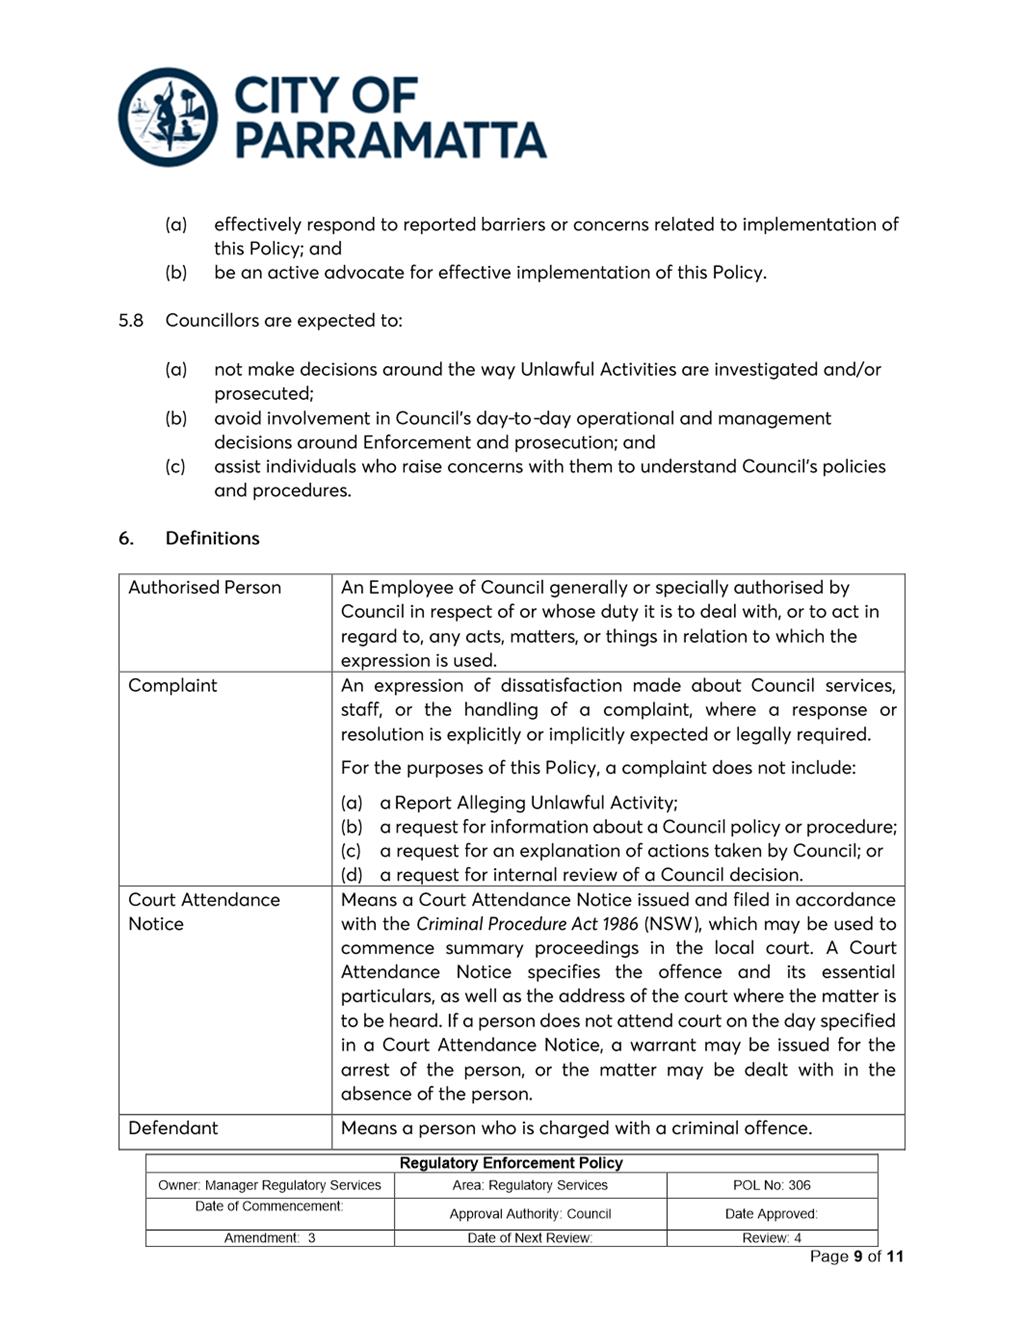 A document with text and a blue circle

Description automatically generated